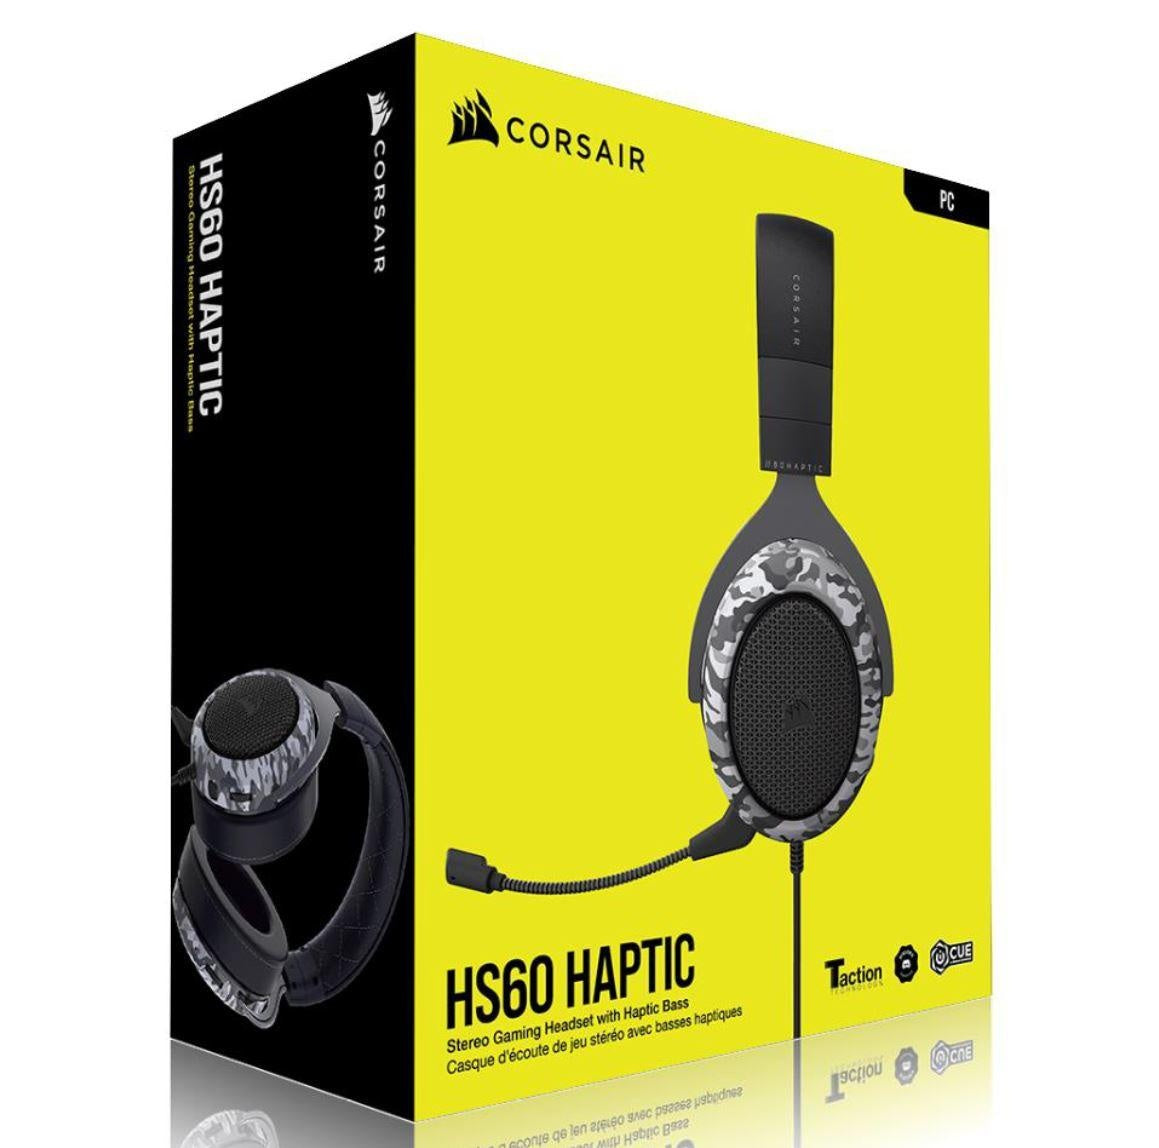 CORSAIR HS60 HAPTIC Stereo Gaming Headset with Haptic Bass - Black with Camouflage Black and White Headset Cover CORSAIR